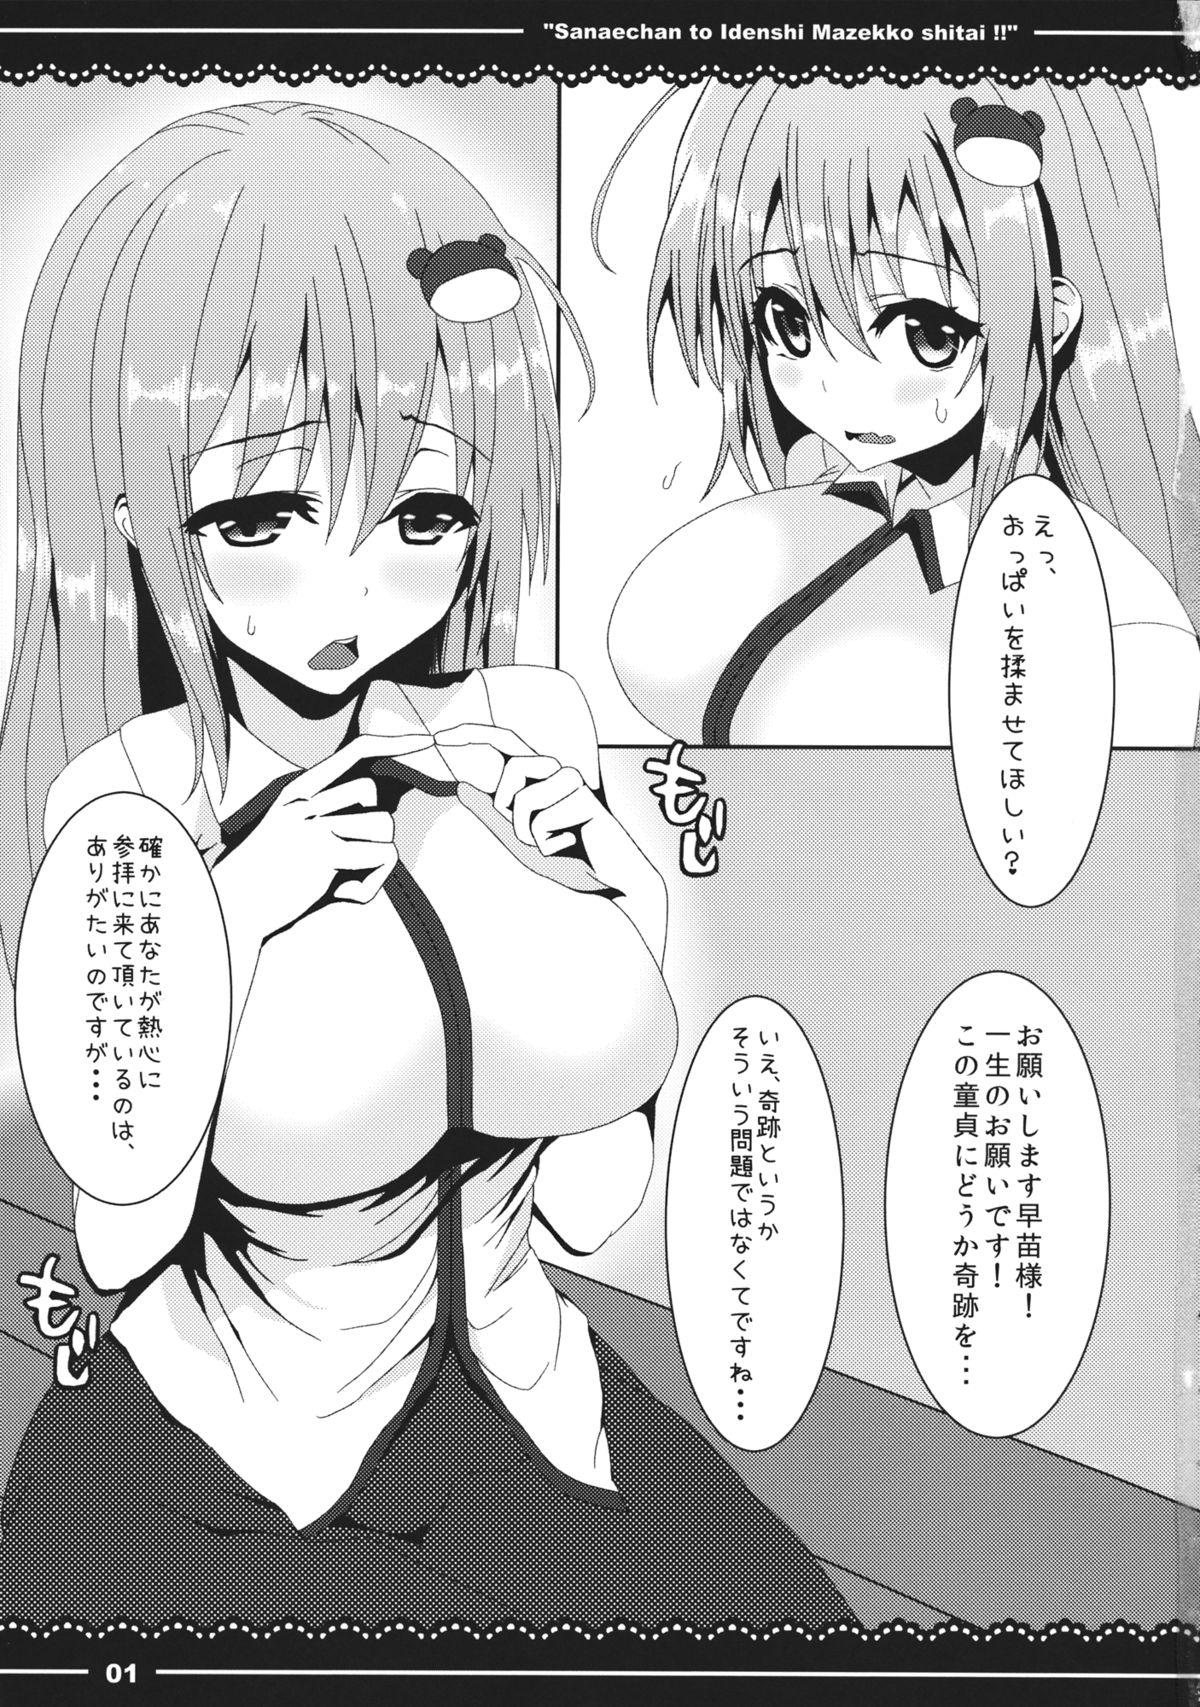 With Sanae-chan to Idenshi Mazekko shitai!! - Touhou project Officesex - Page 2